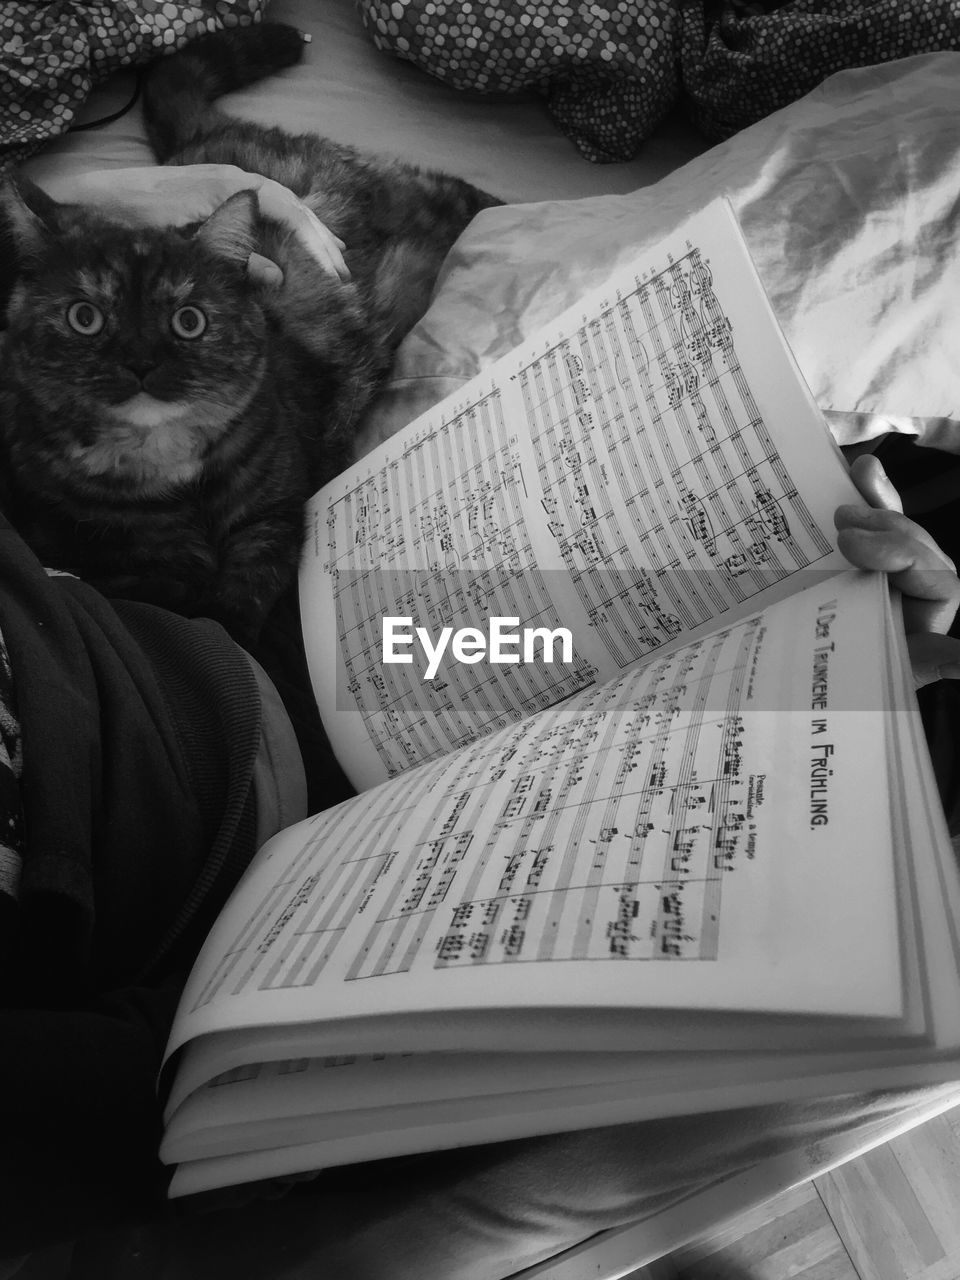 PORTRAIT OF CAT BY BOOK ON BED